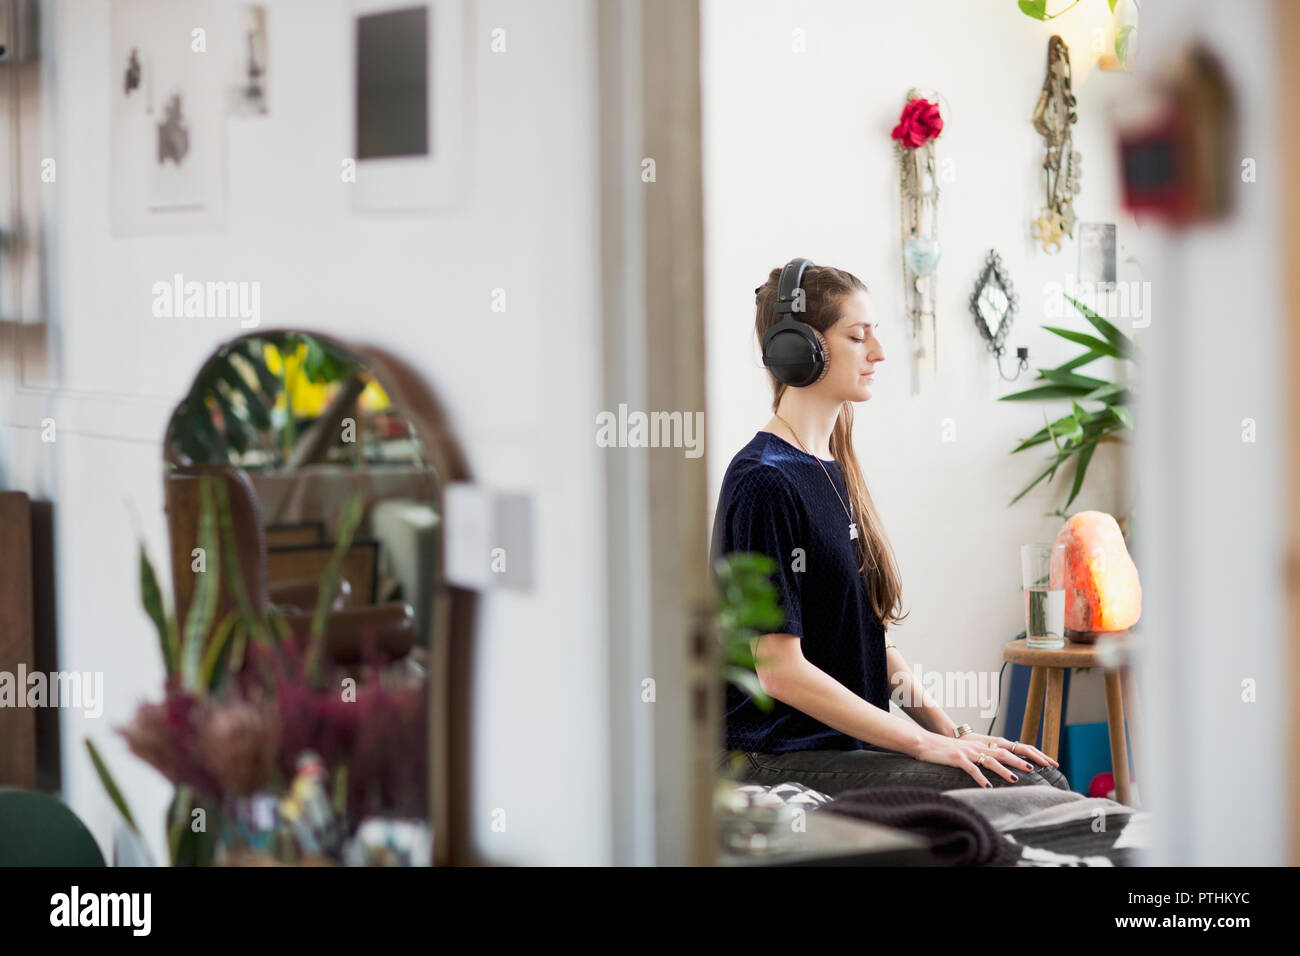 Serene young woman meditating with headphones in apartment Stock Photo